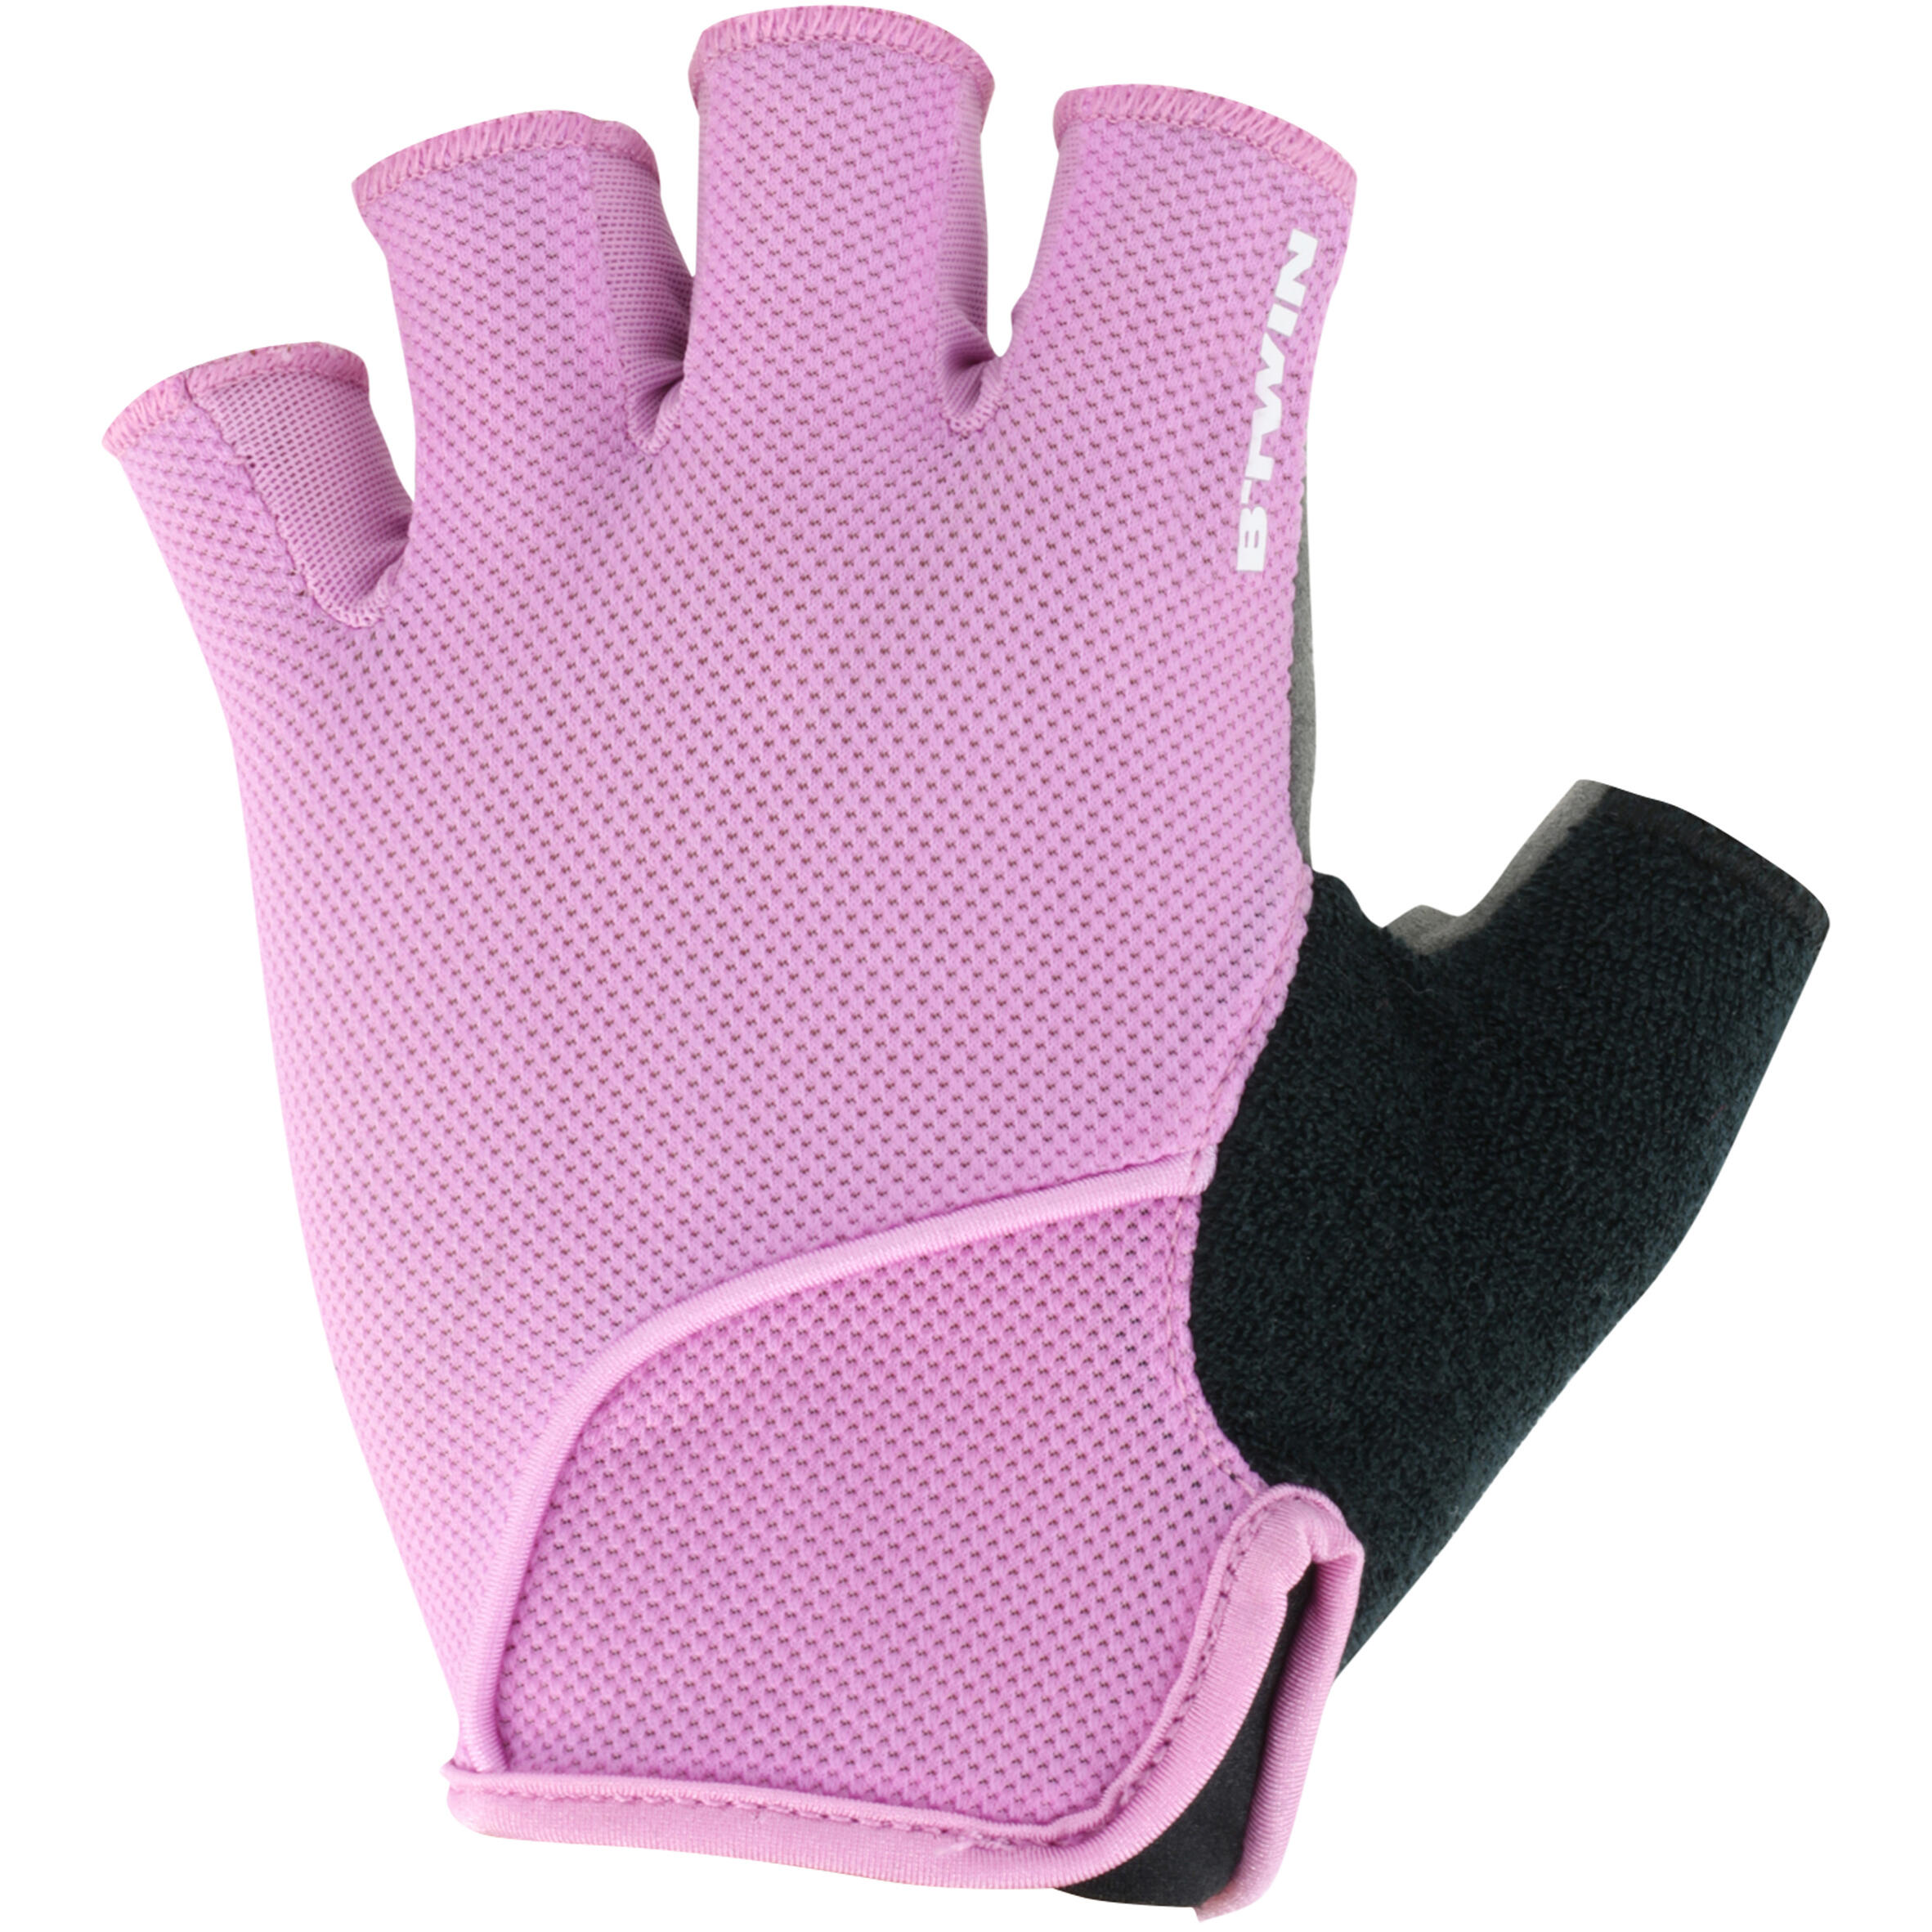 TRIBAN 500 Road Cycling Gloves - Light Pink